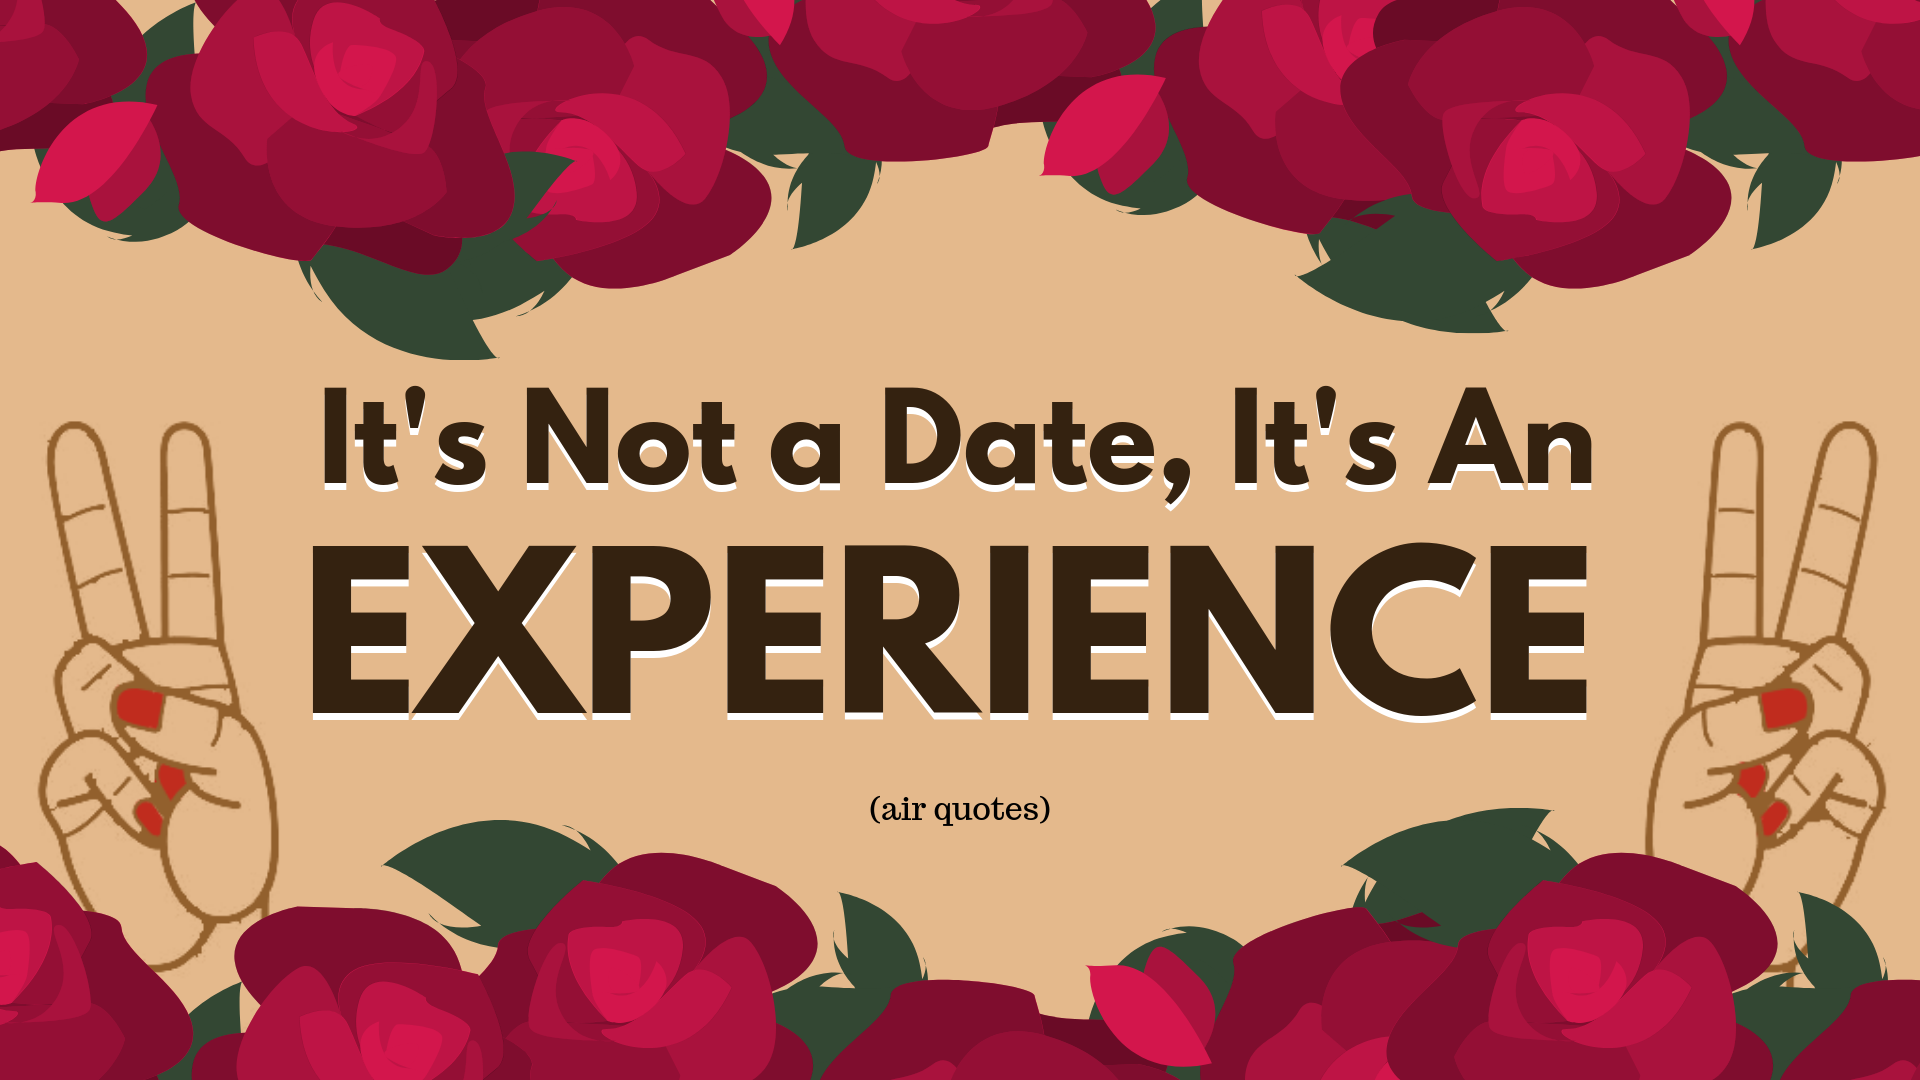 IT'S NOT A DATE ITS AN EXPERIENCE.png